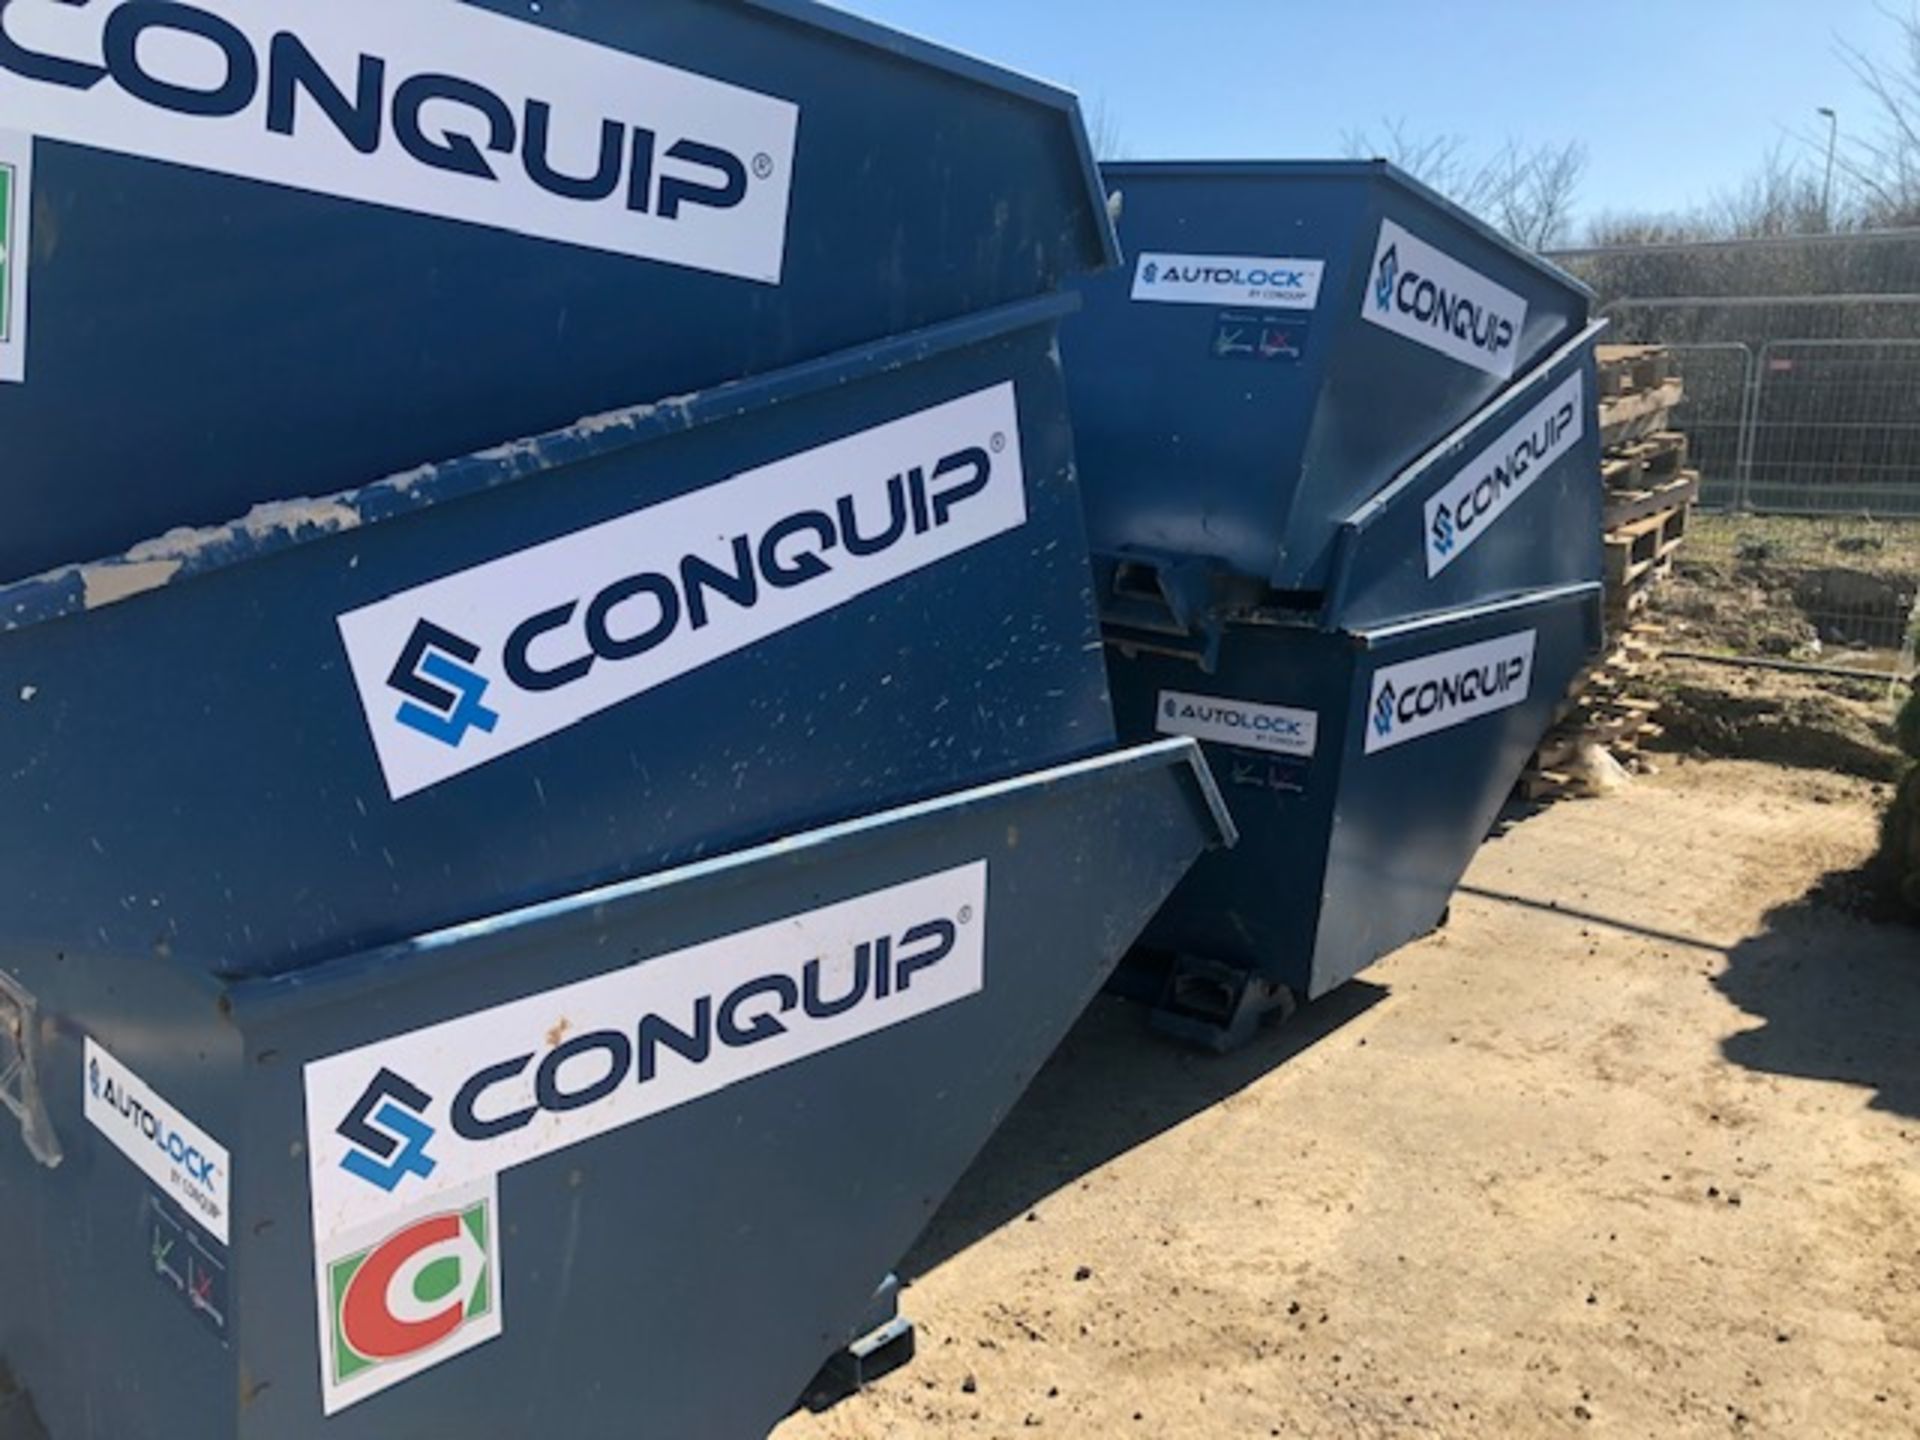 ** NEW LOT** 18 x Conquip tipping skips (delivered new Feb 2020) - located Dover Kent UK - Image 3 of 4